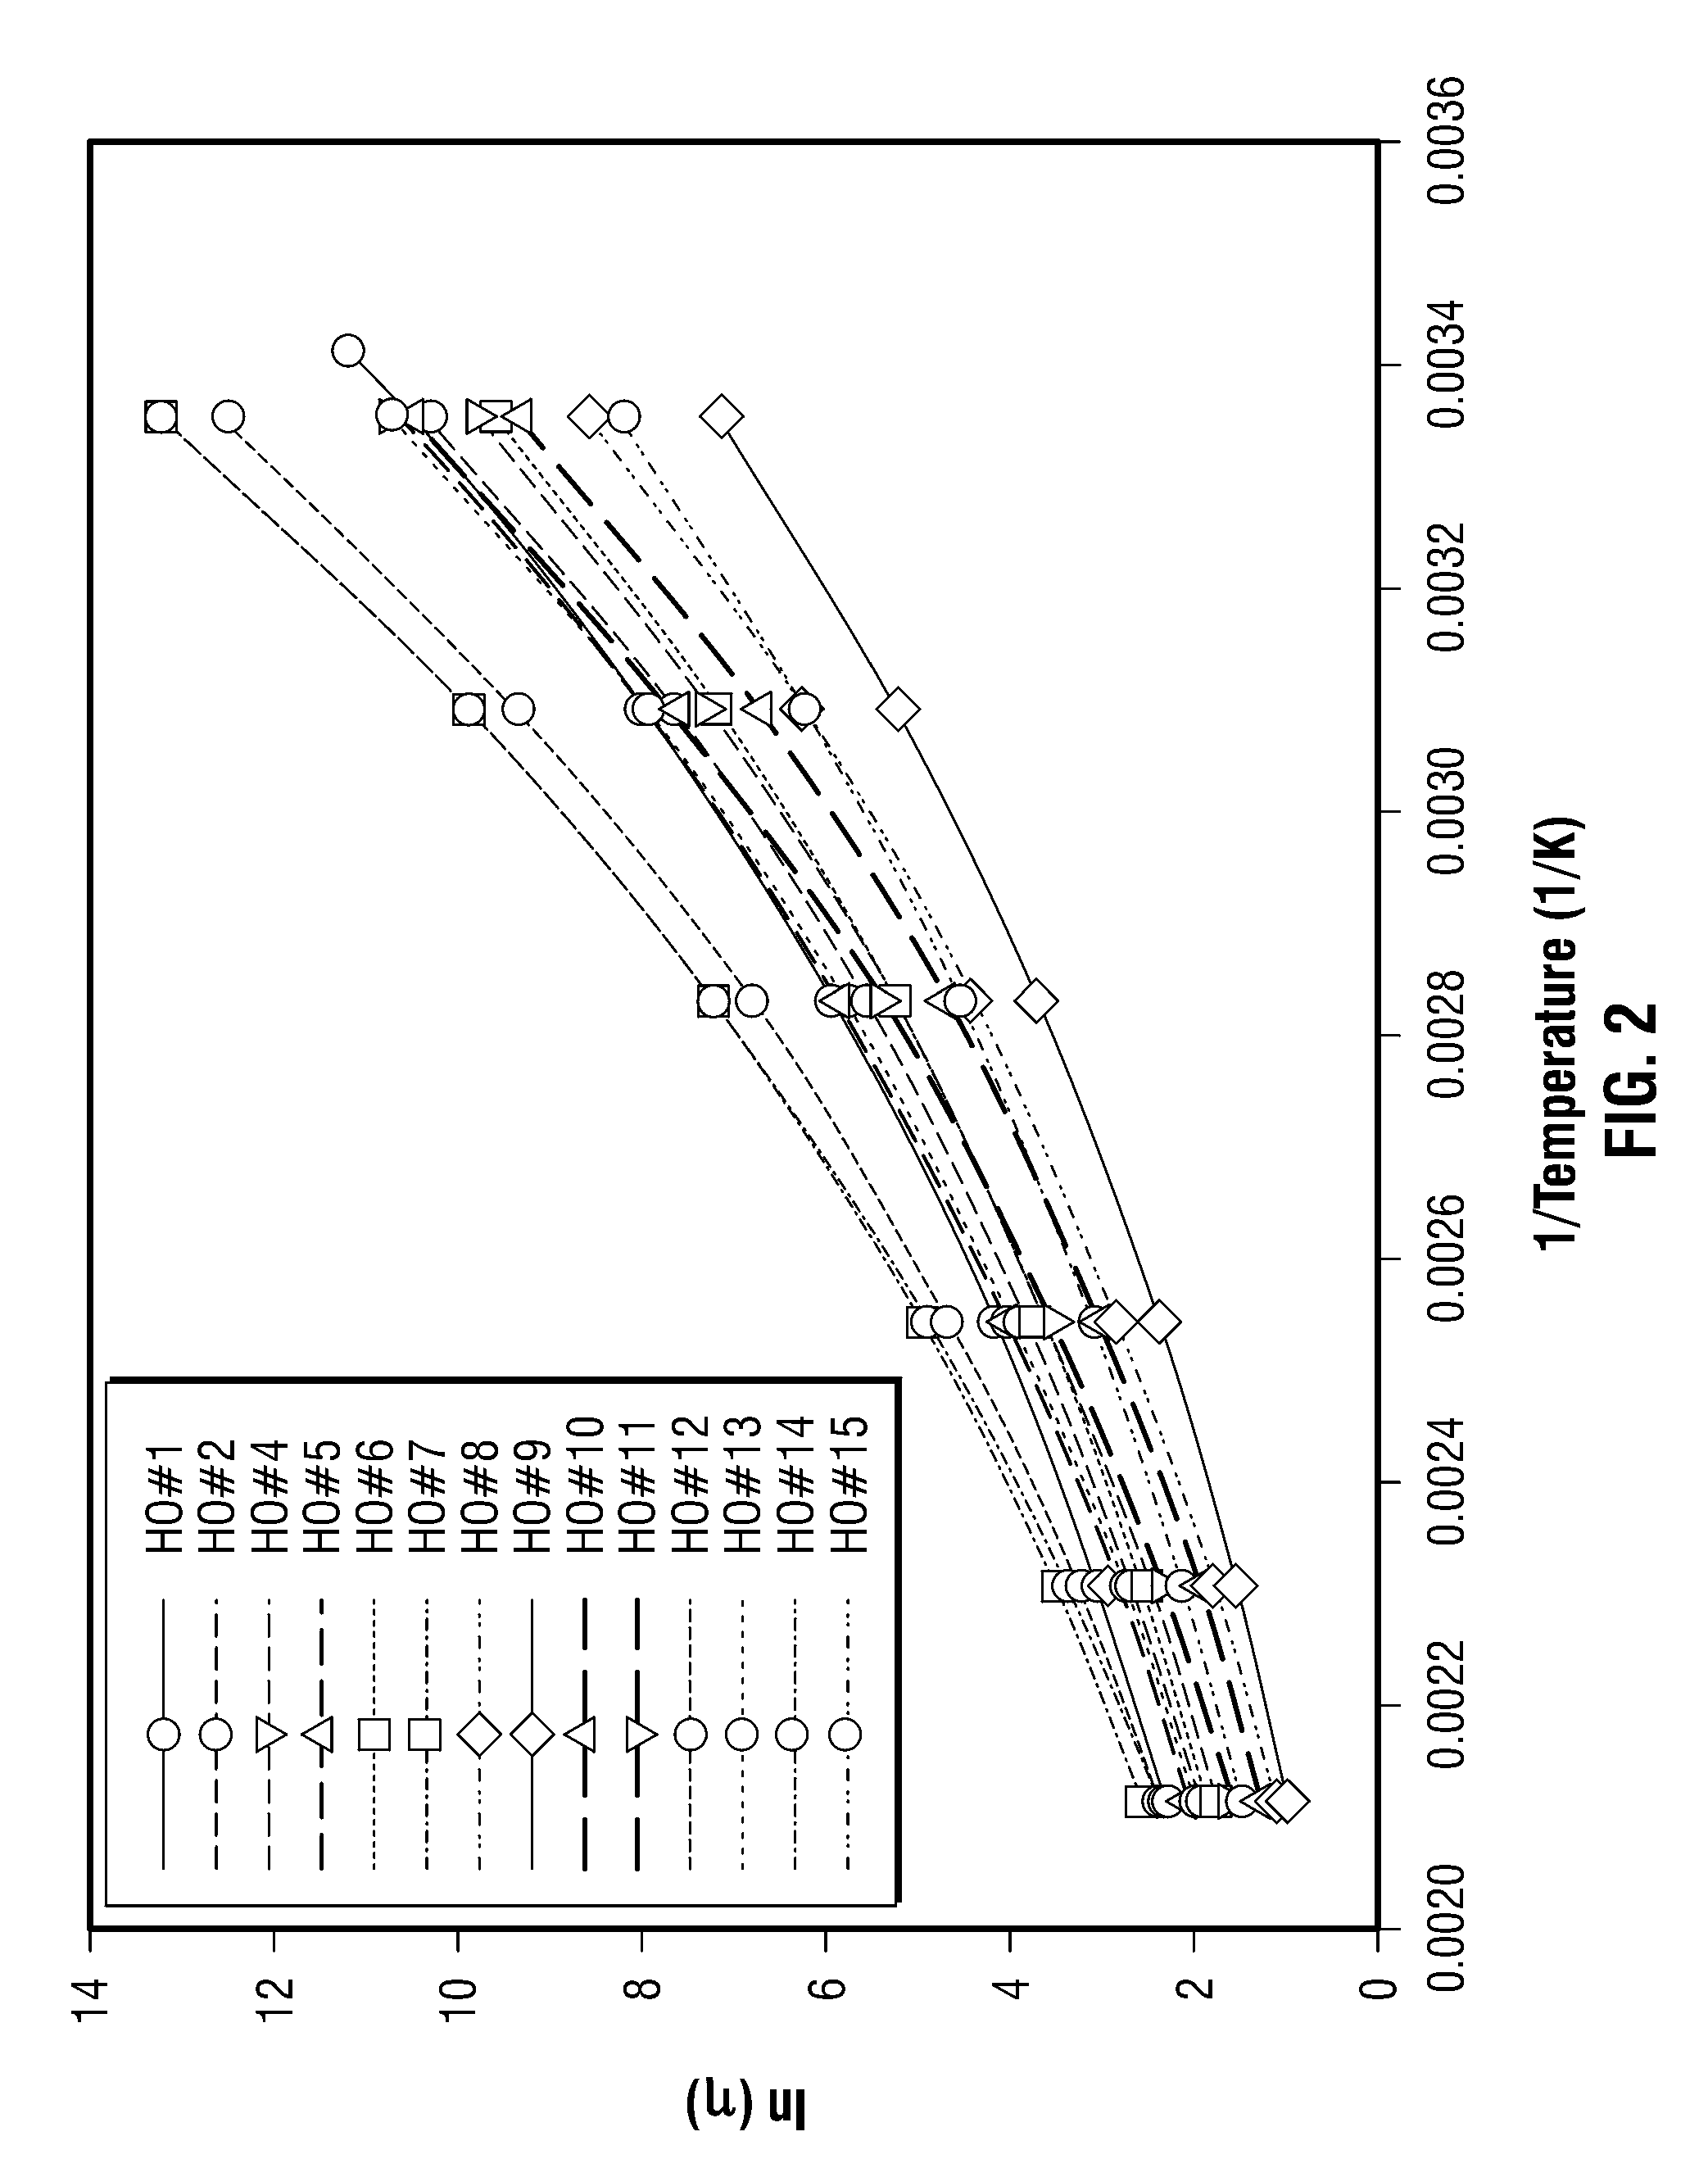 Methods for determining in situ the viscosity of heavy oil using nuclear magnetic resonance relaxation time measurements